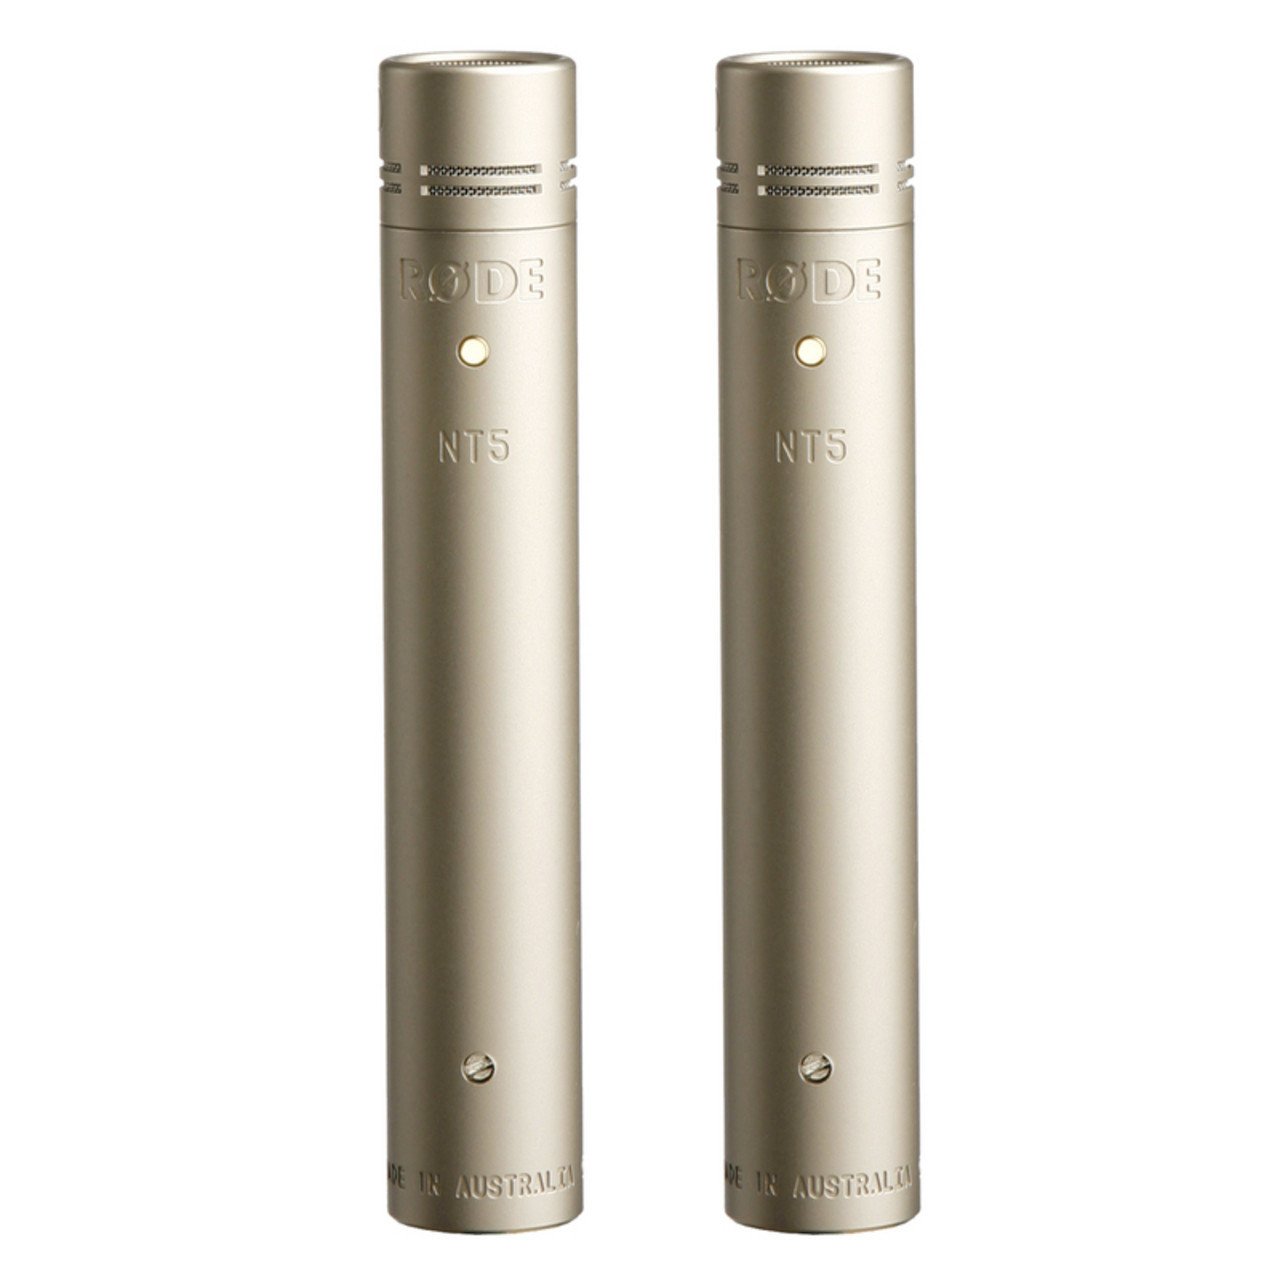 Condenser Microphones - RODE NT5 Stereo Pair Compact 1/2" Cardioid Condenser Microphones